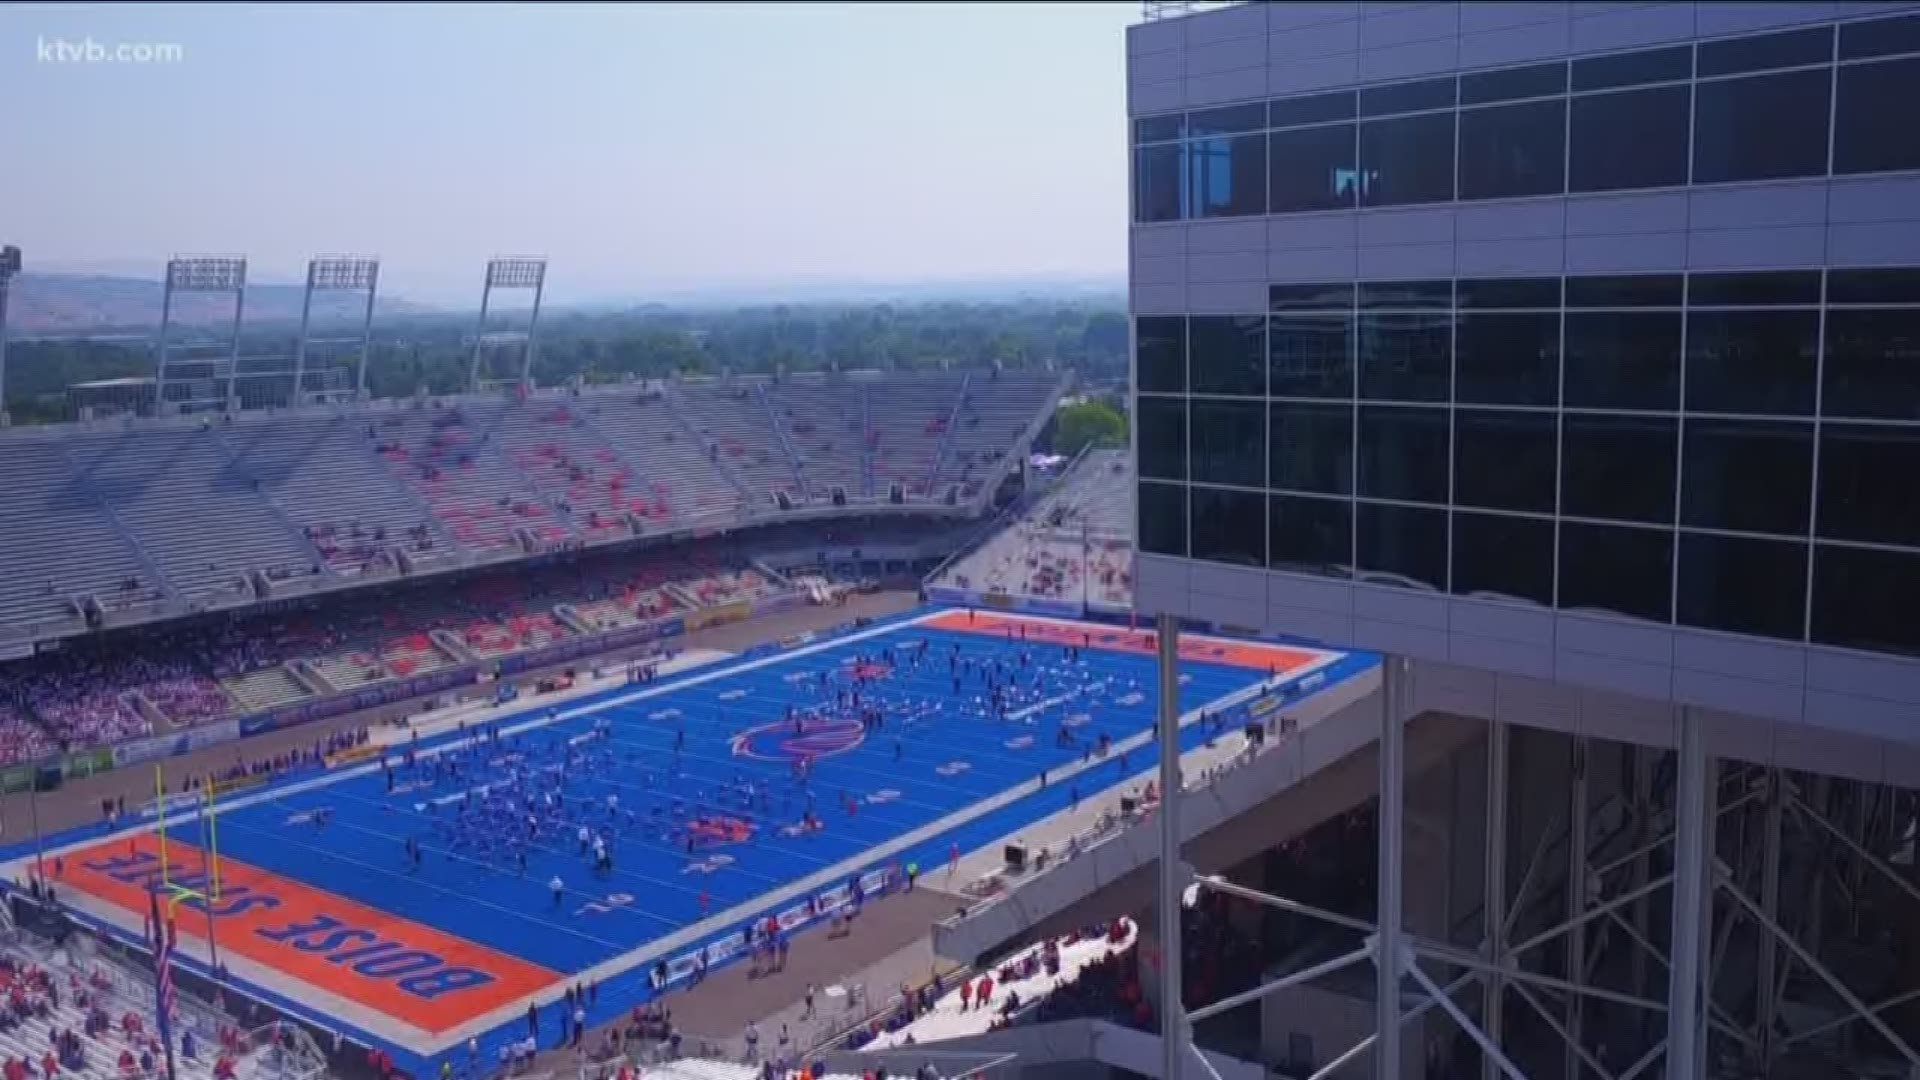 Bronco fans looking for a way to watch the Broncos at Albertsons Stadium this fall now have a new option when it comes to purchasing season tickets.